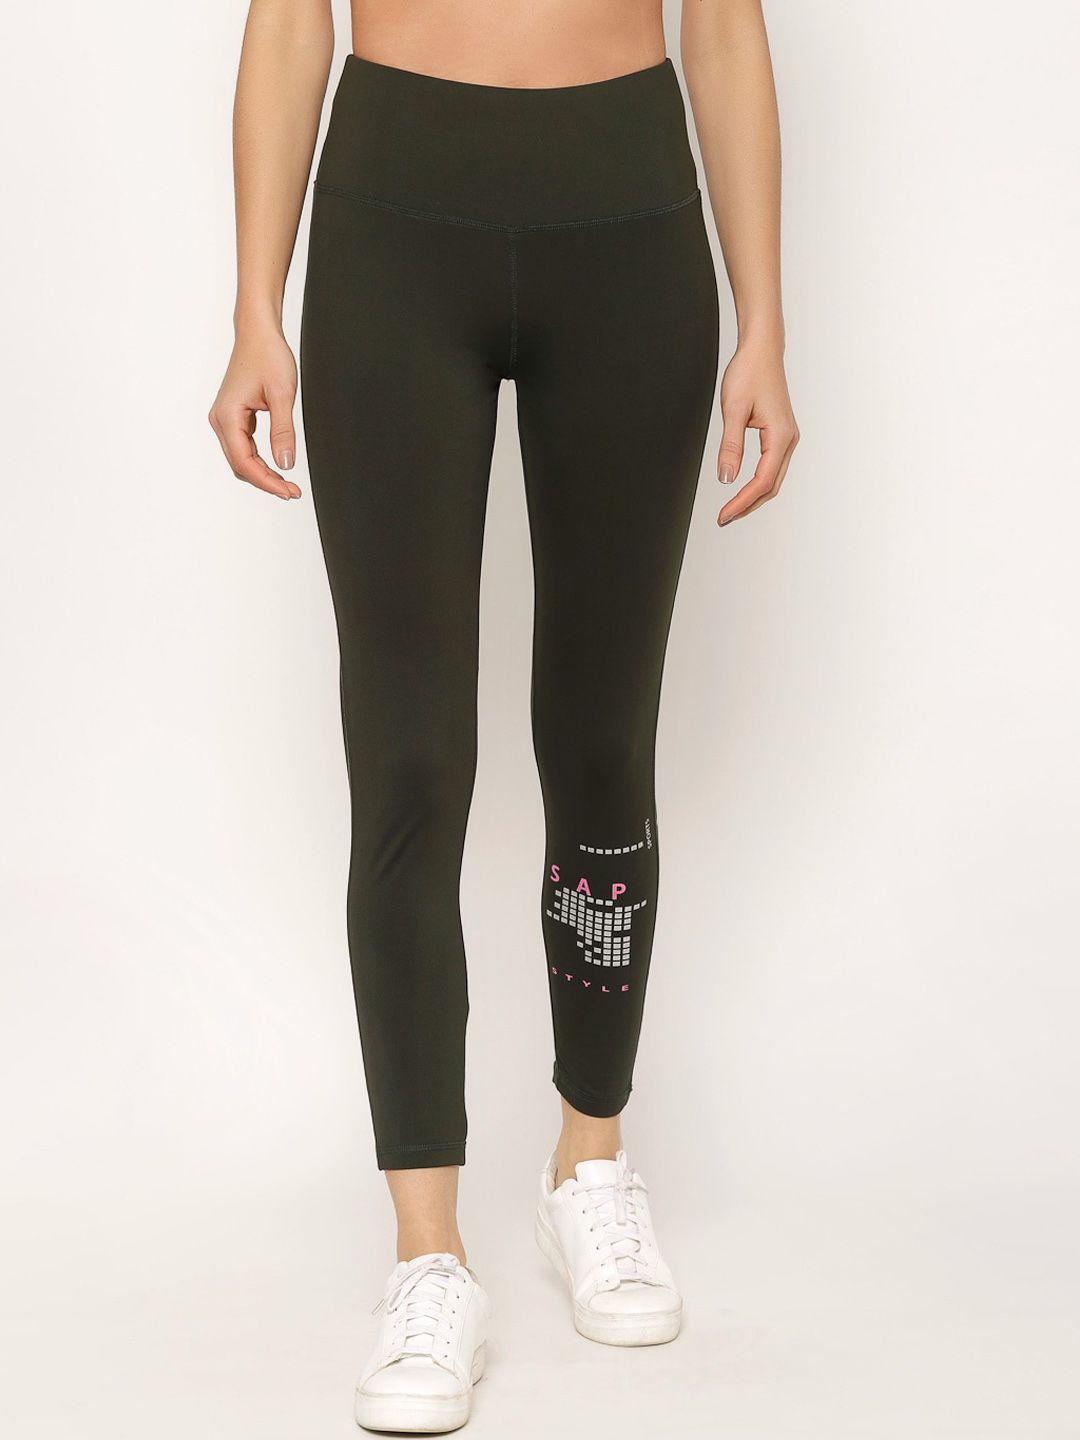 SAPPER Women Olive-Green Solid Track Pants Price in India